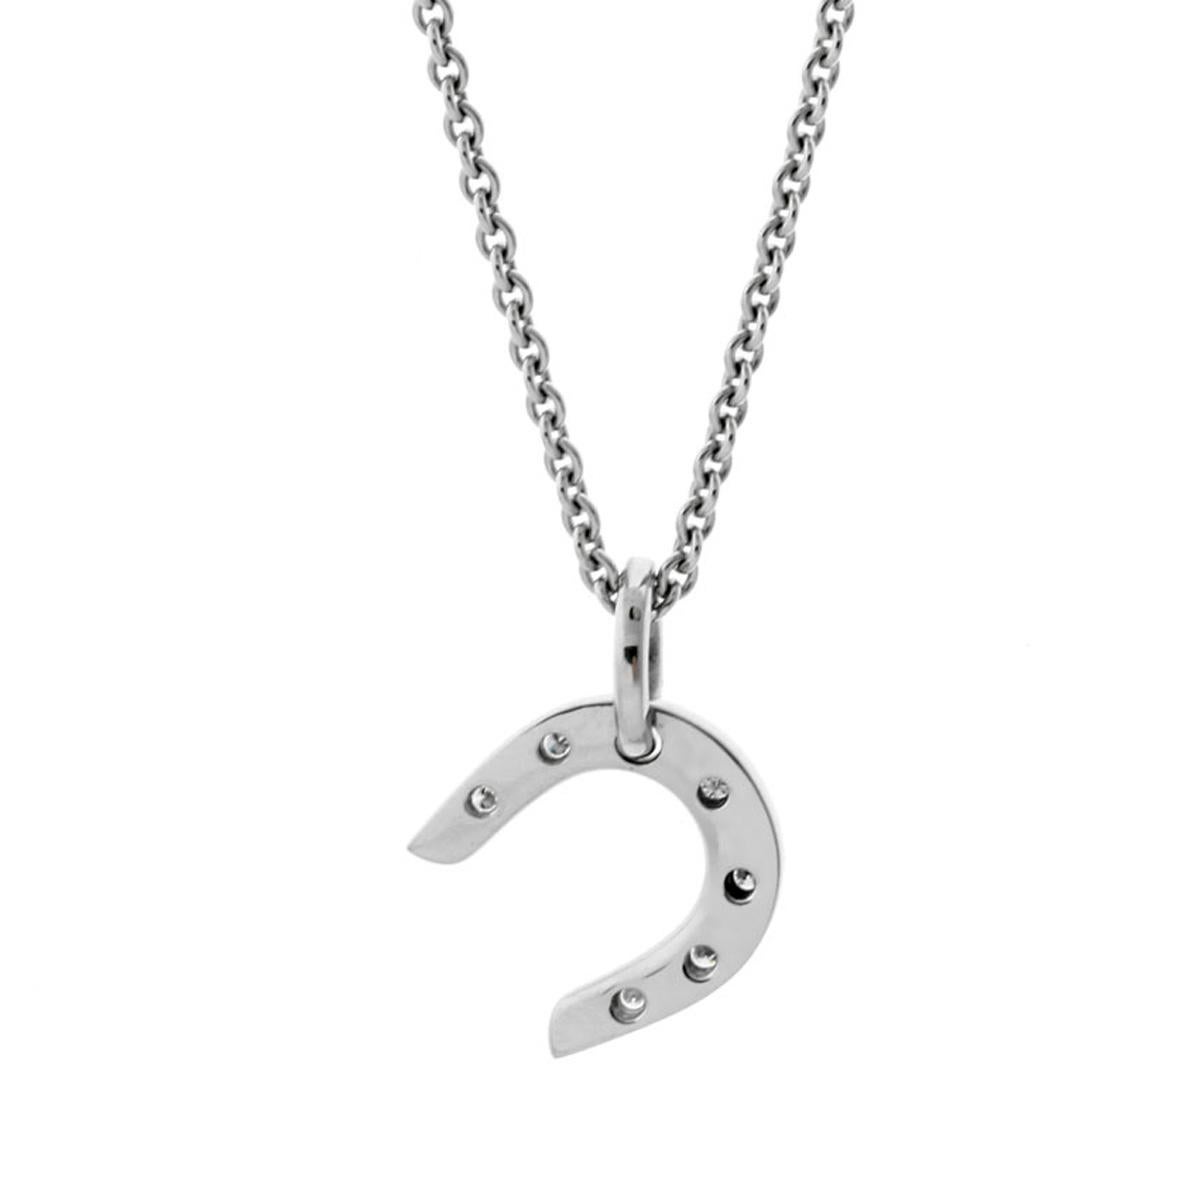 A chic Hermes horseshoe diamond necklace crafted in 18k white gold set with Hermes round brilliant cut diamonds. Sku 1265